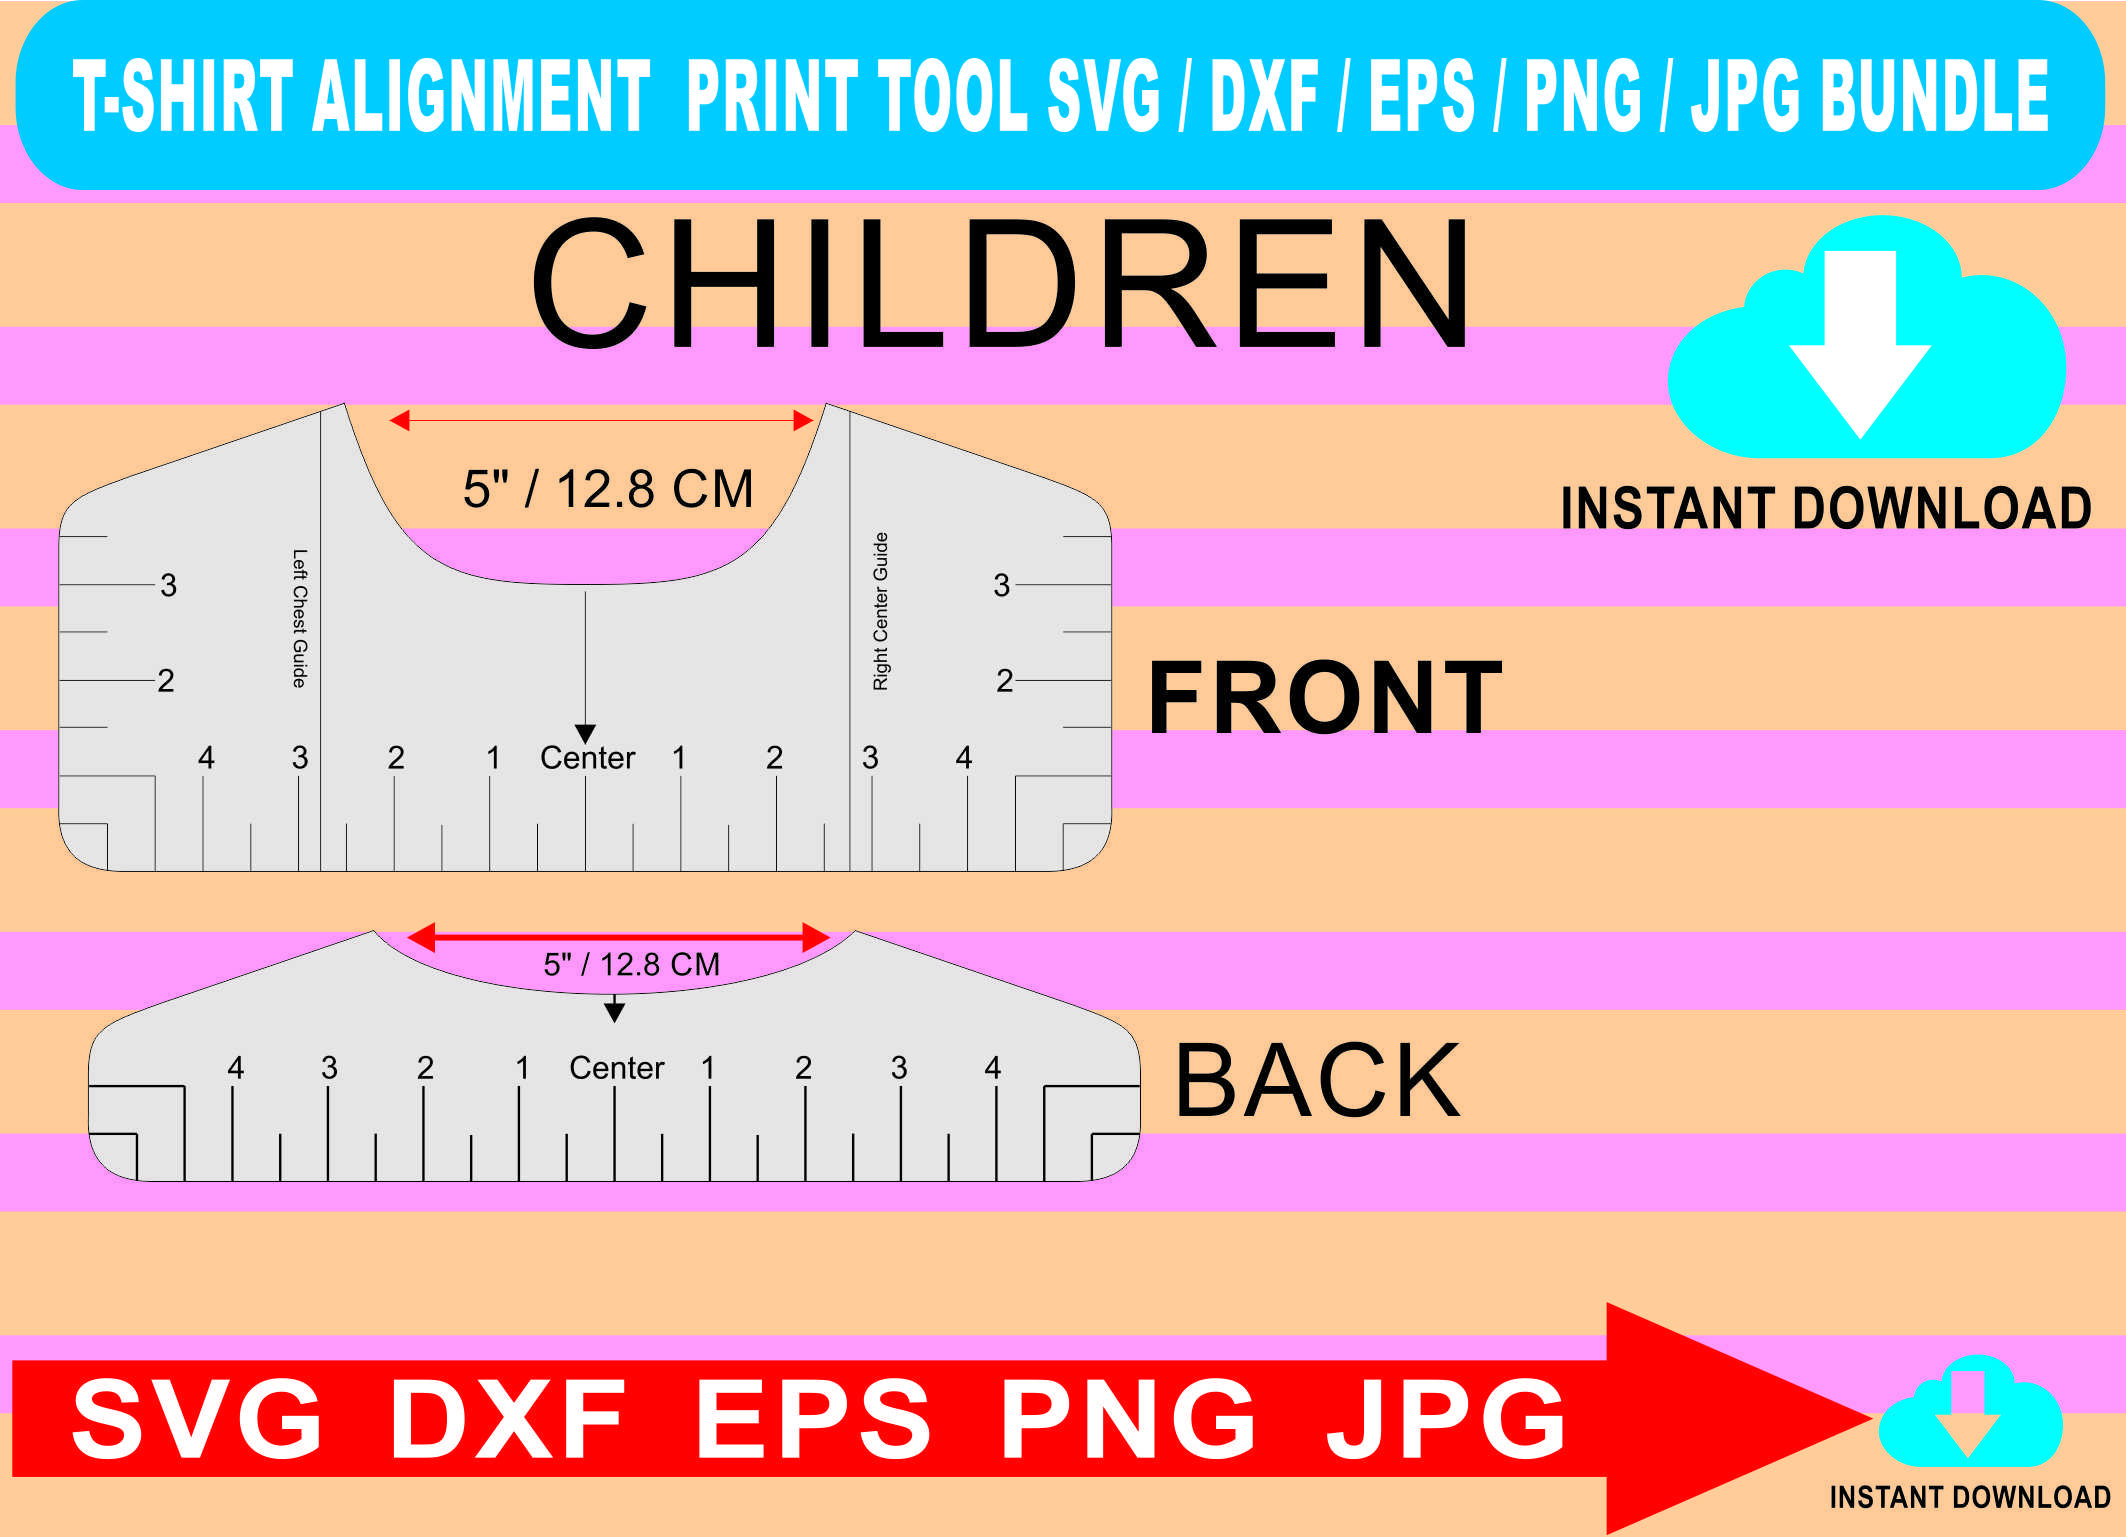 SVG Tshirt Ruler, Printable, T shirt ALIGNMENT, Design Placement Tool  Centering Tool, T shirt Center, Svg Cut Files Svg Dxf Laser Glowforge